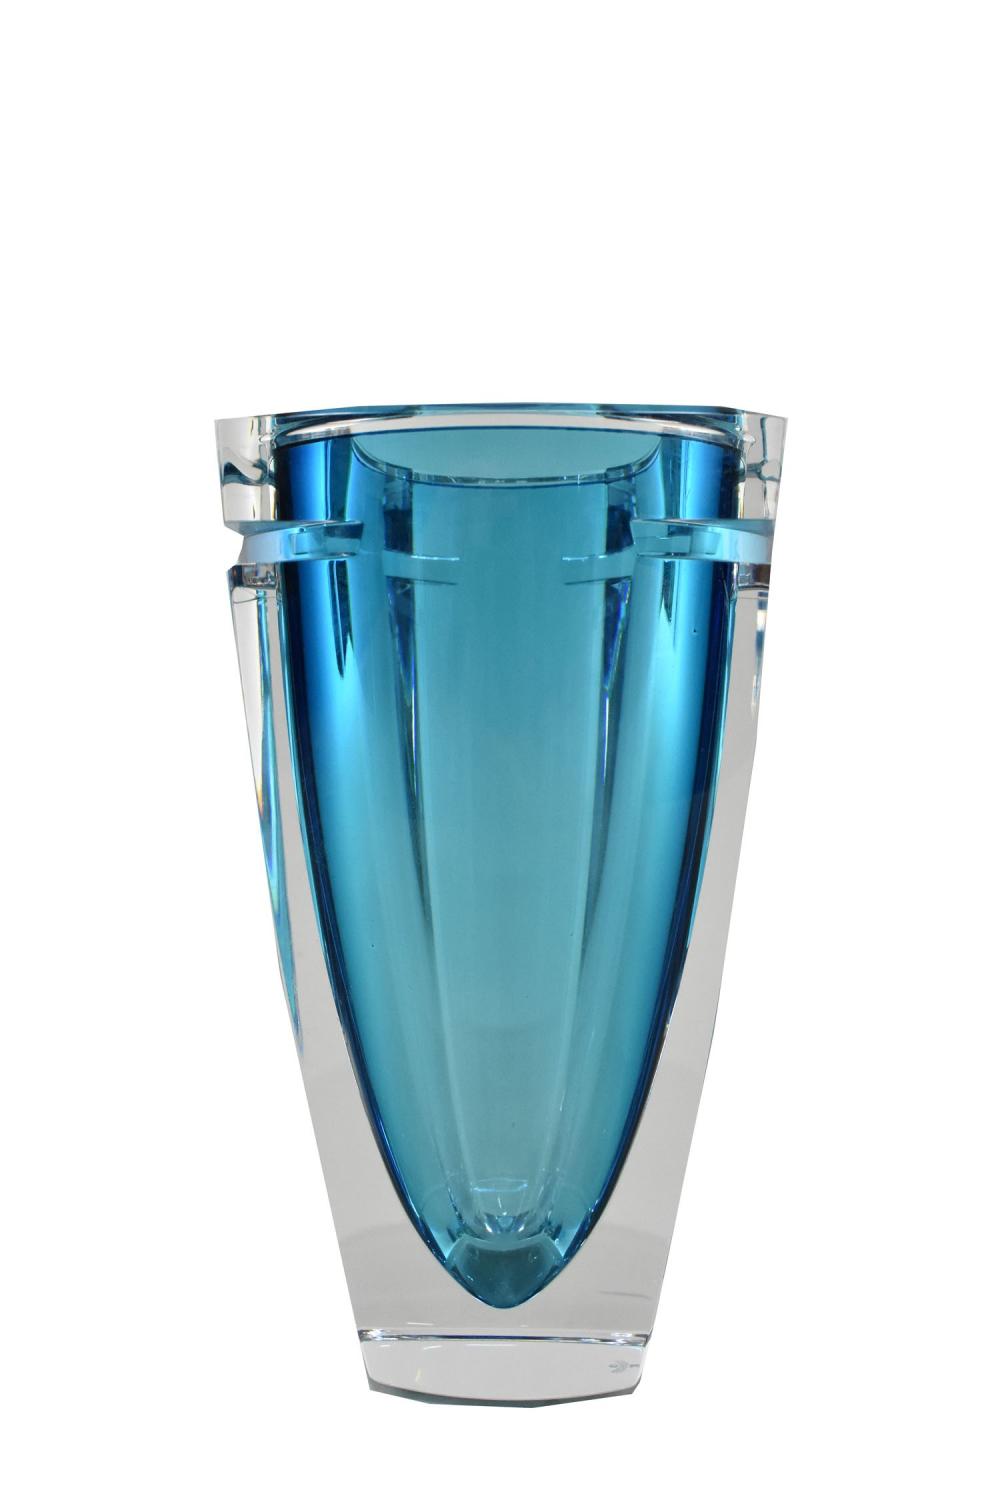 WATERFORD BLUE AND COLORLESS GLASS